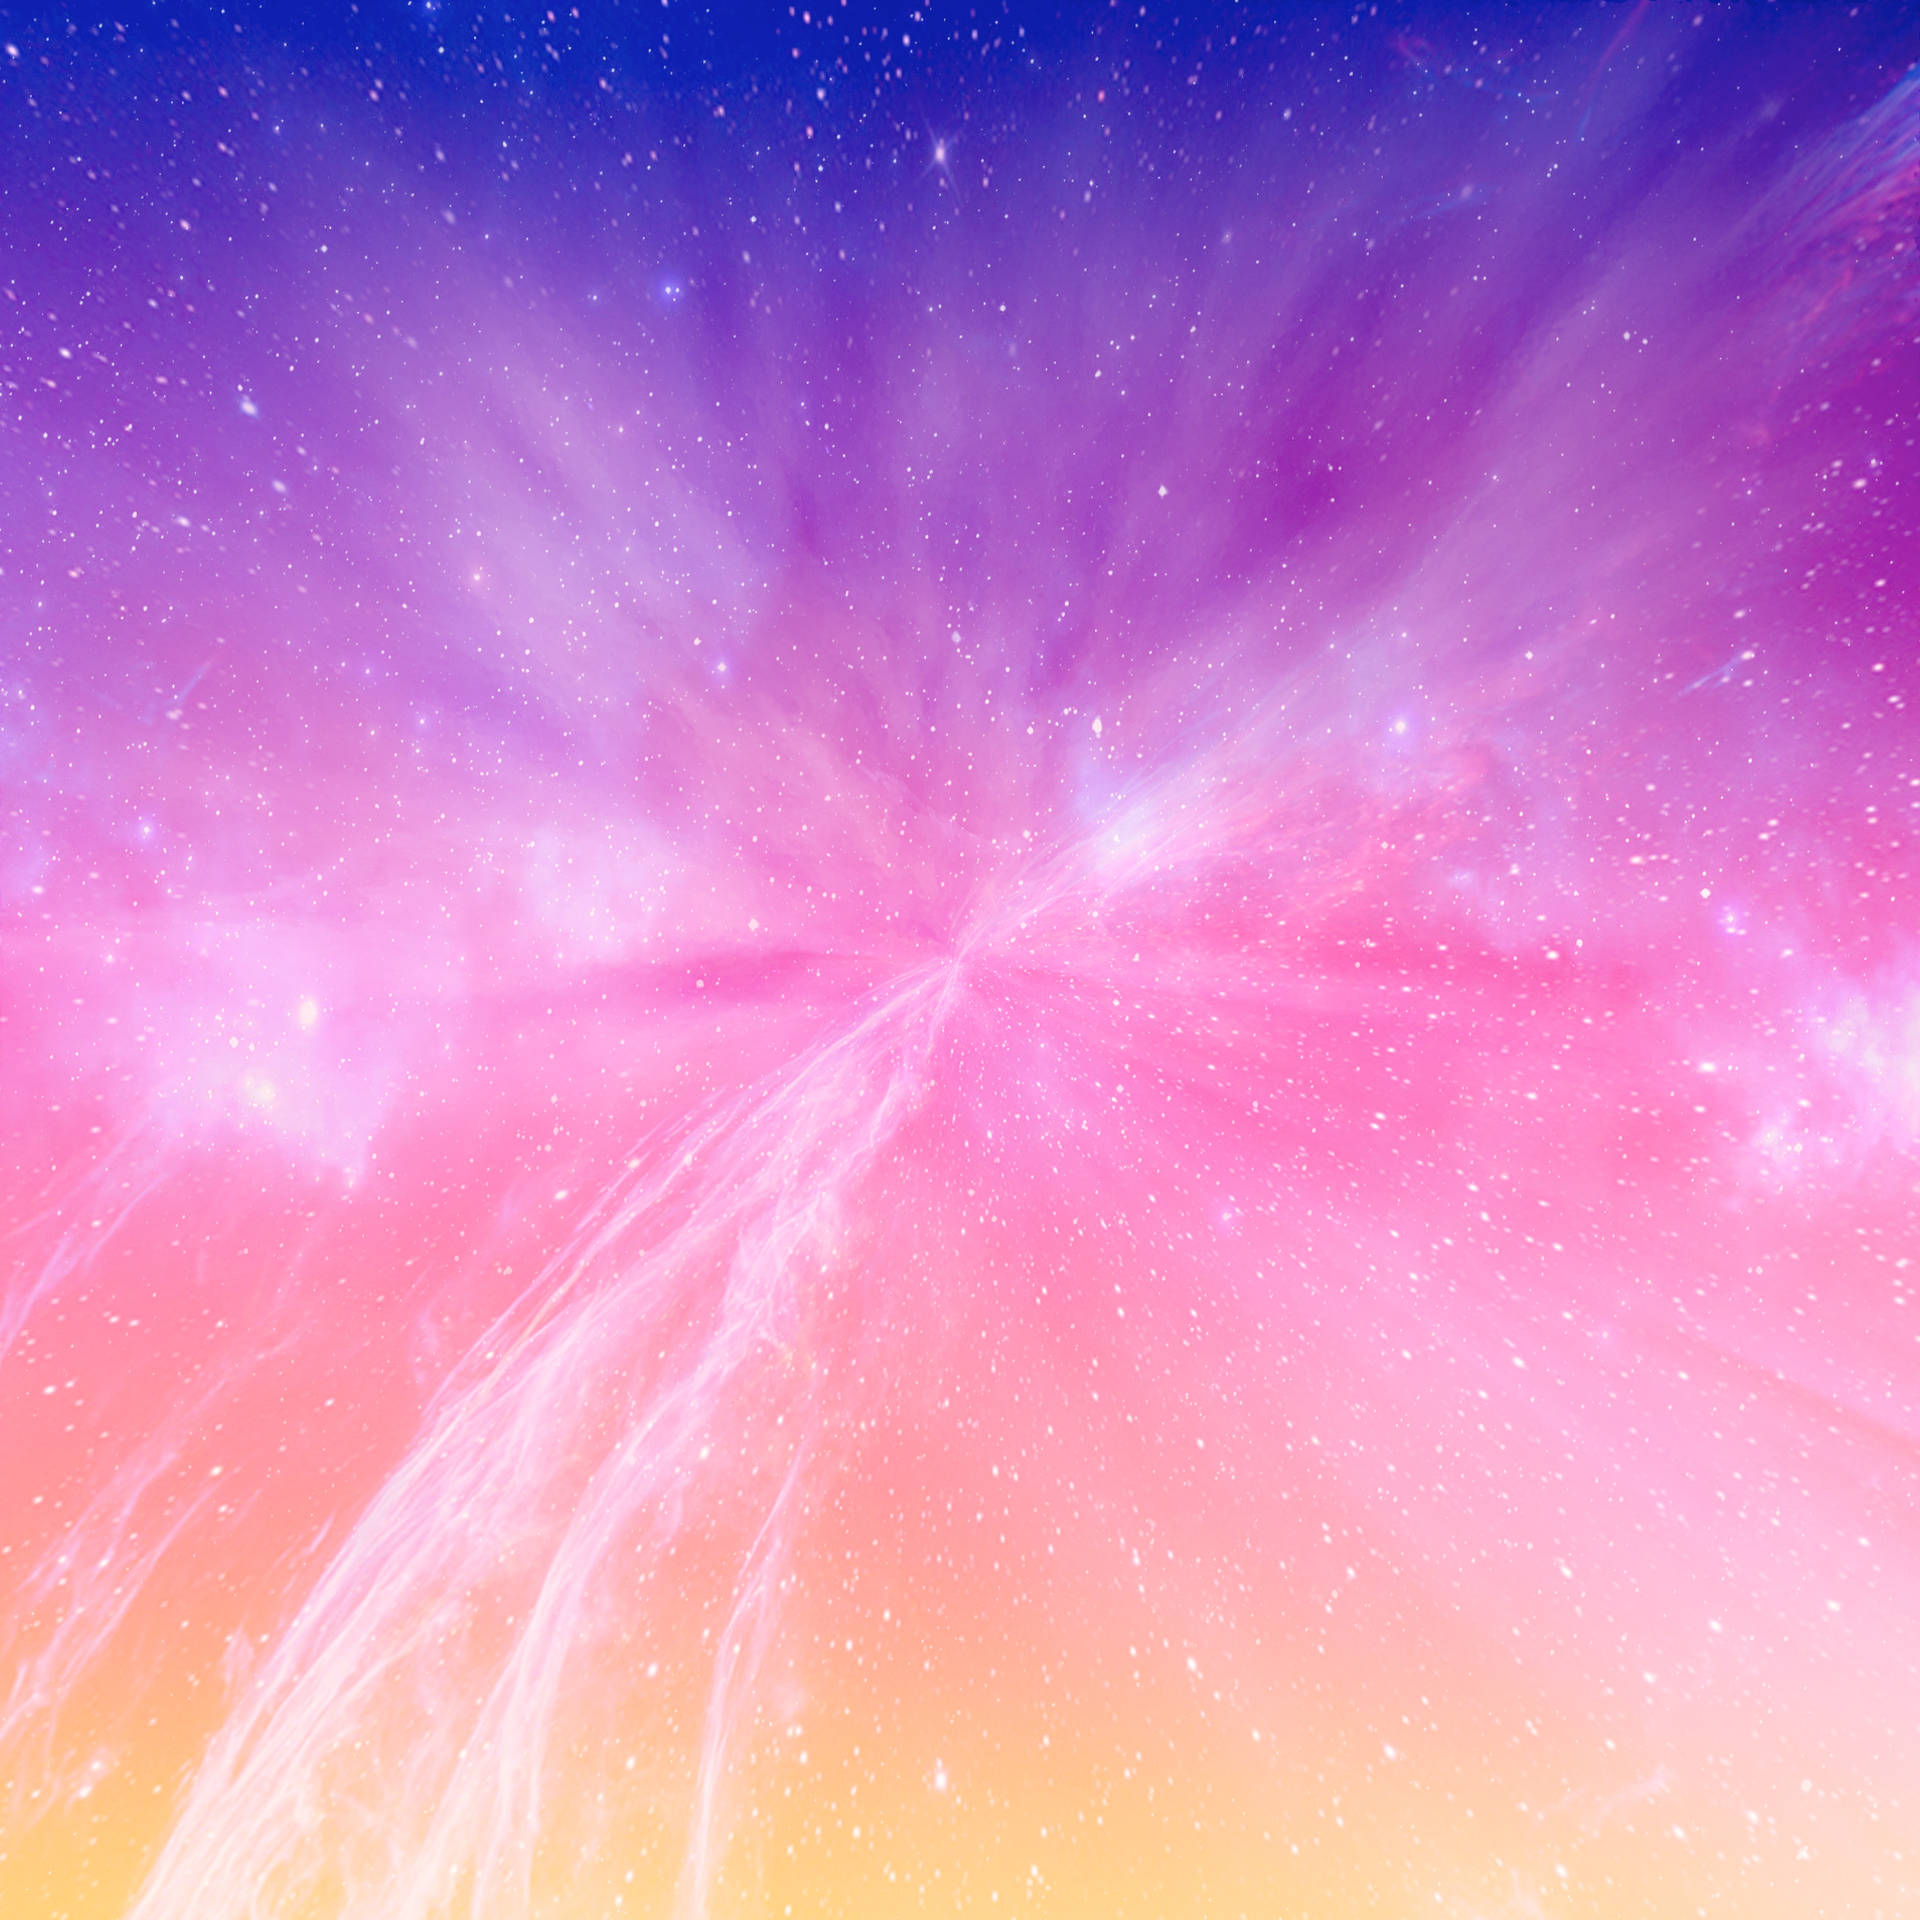 Wildly Colored Galactic Bright Background Wallpaper